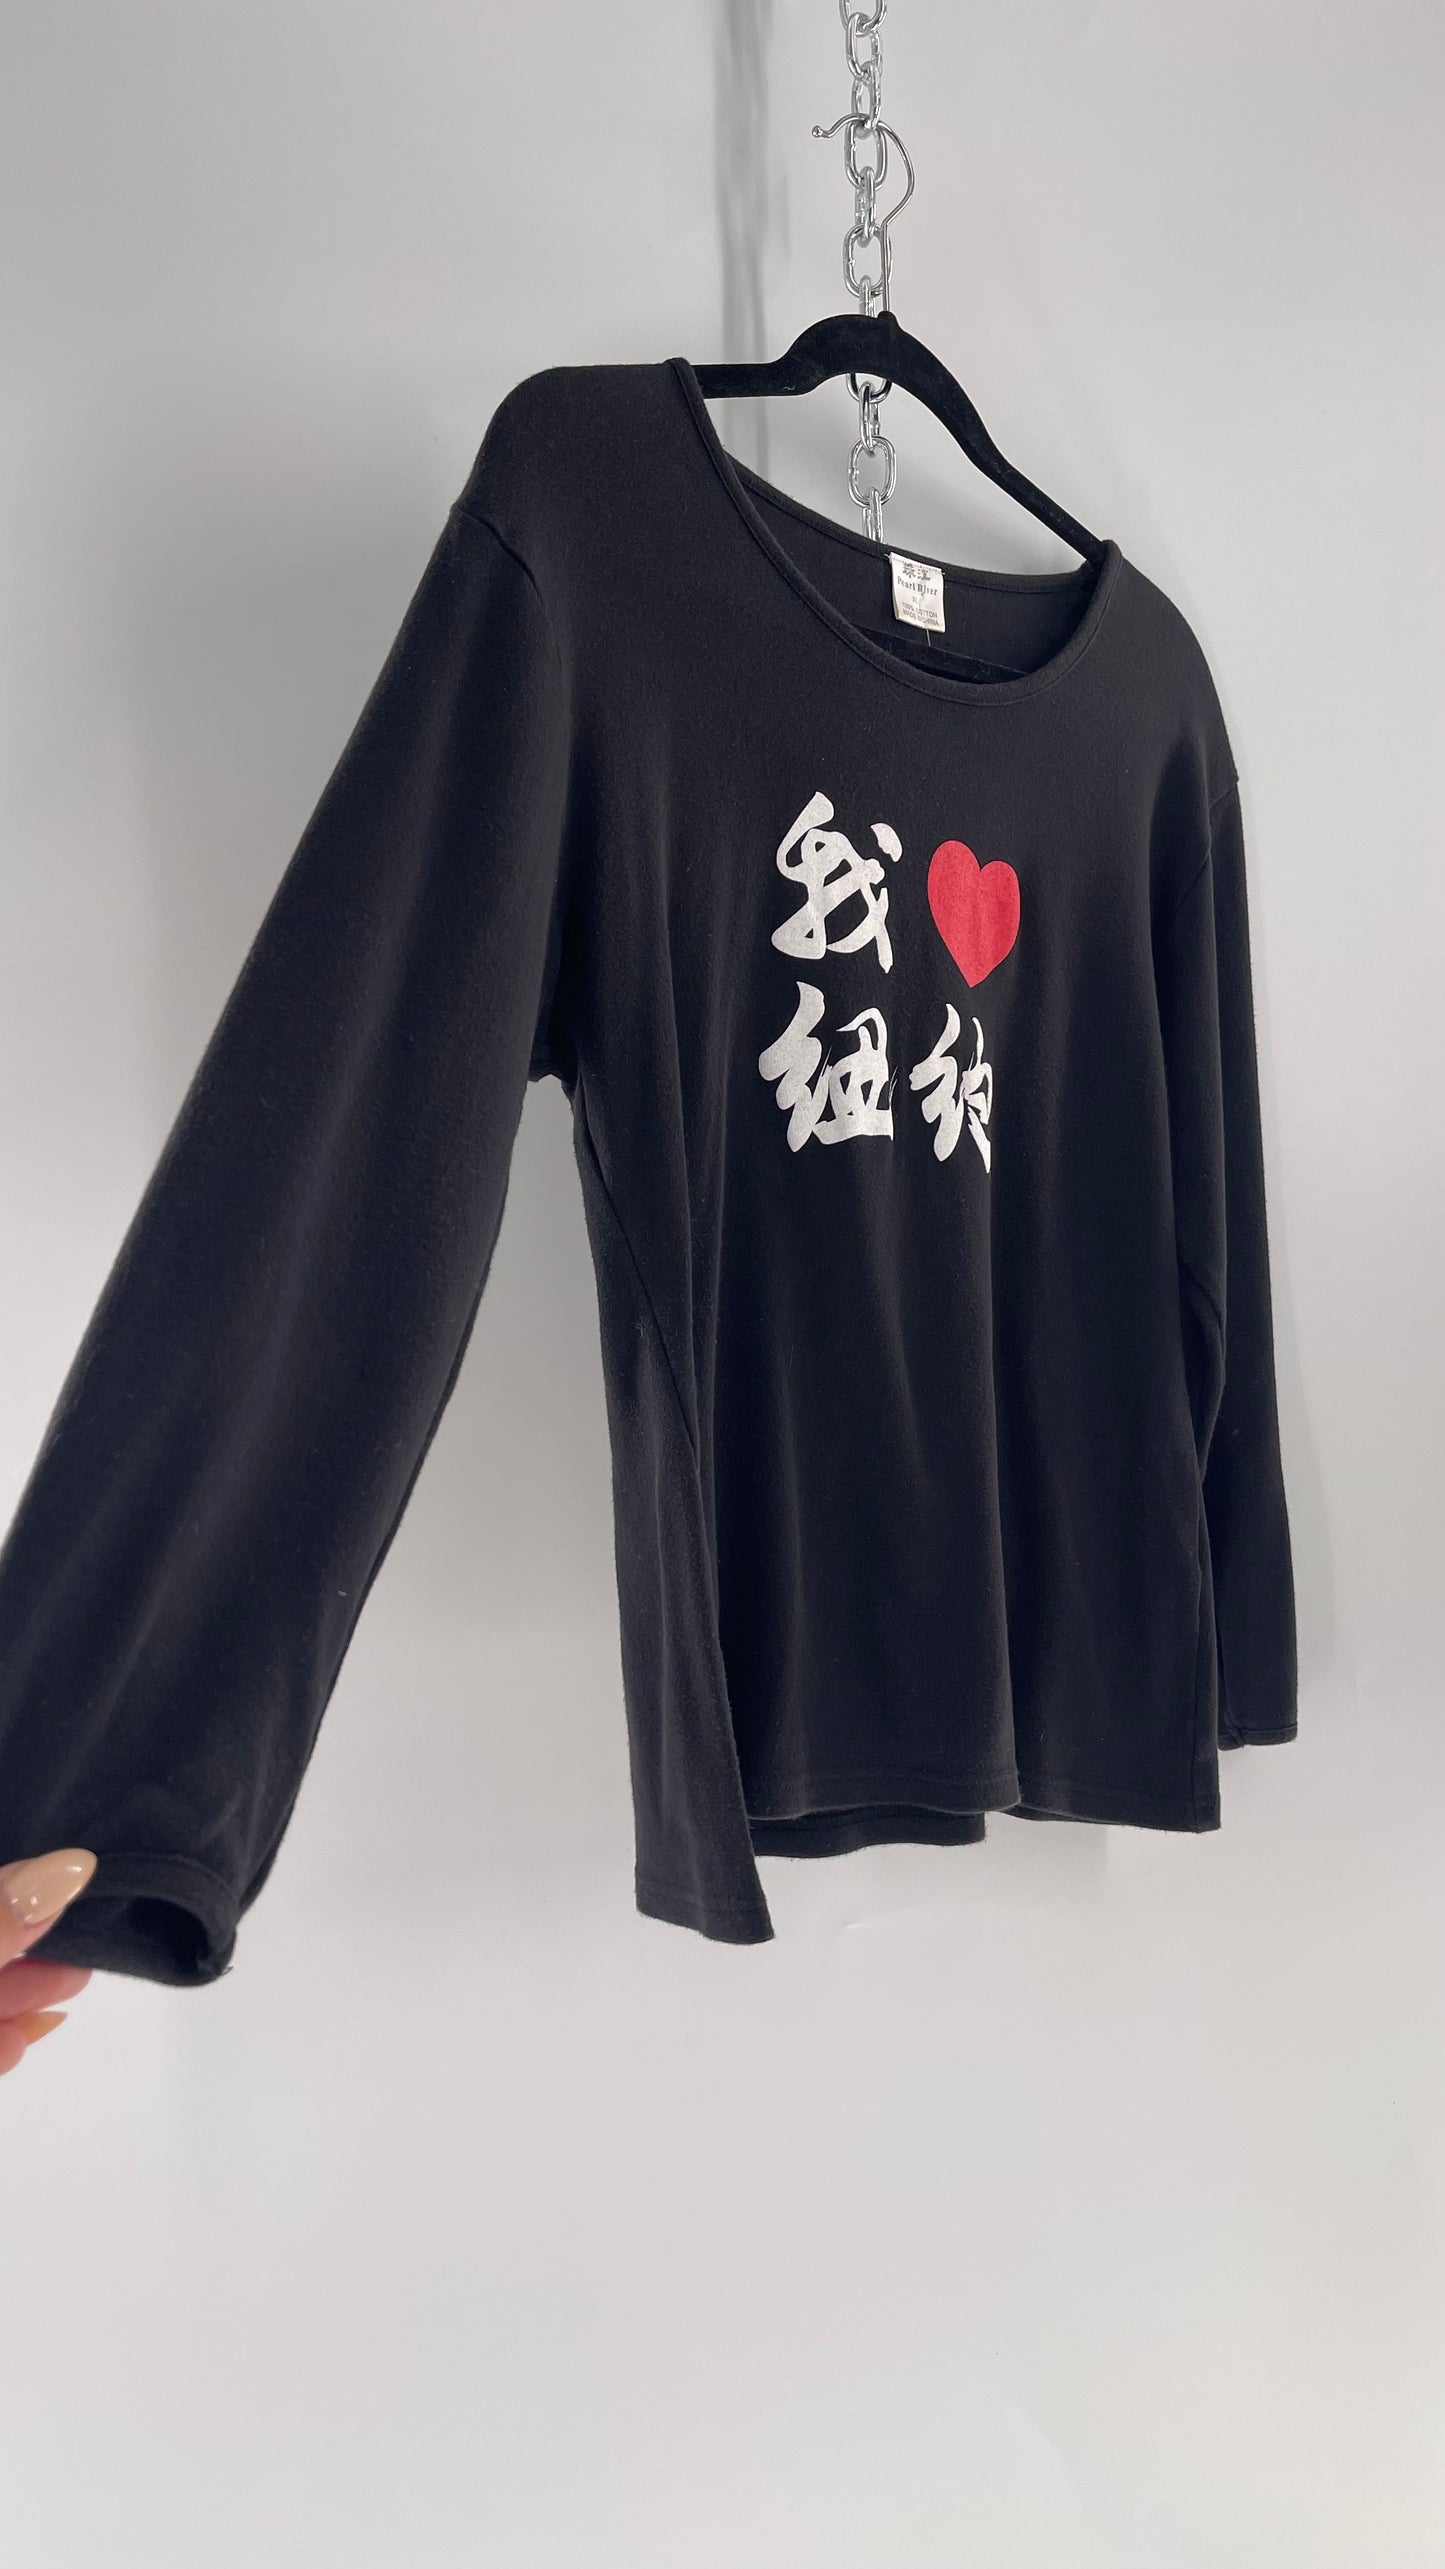 Vintage Chinese Graphic “I <3 New York” T (XL)